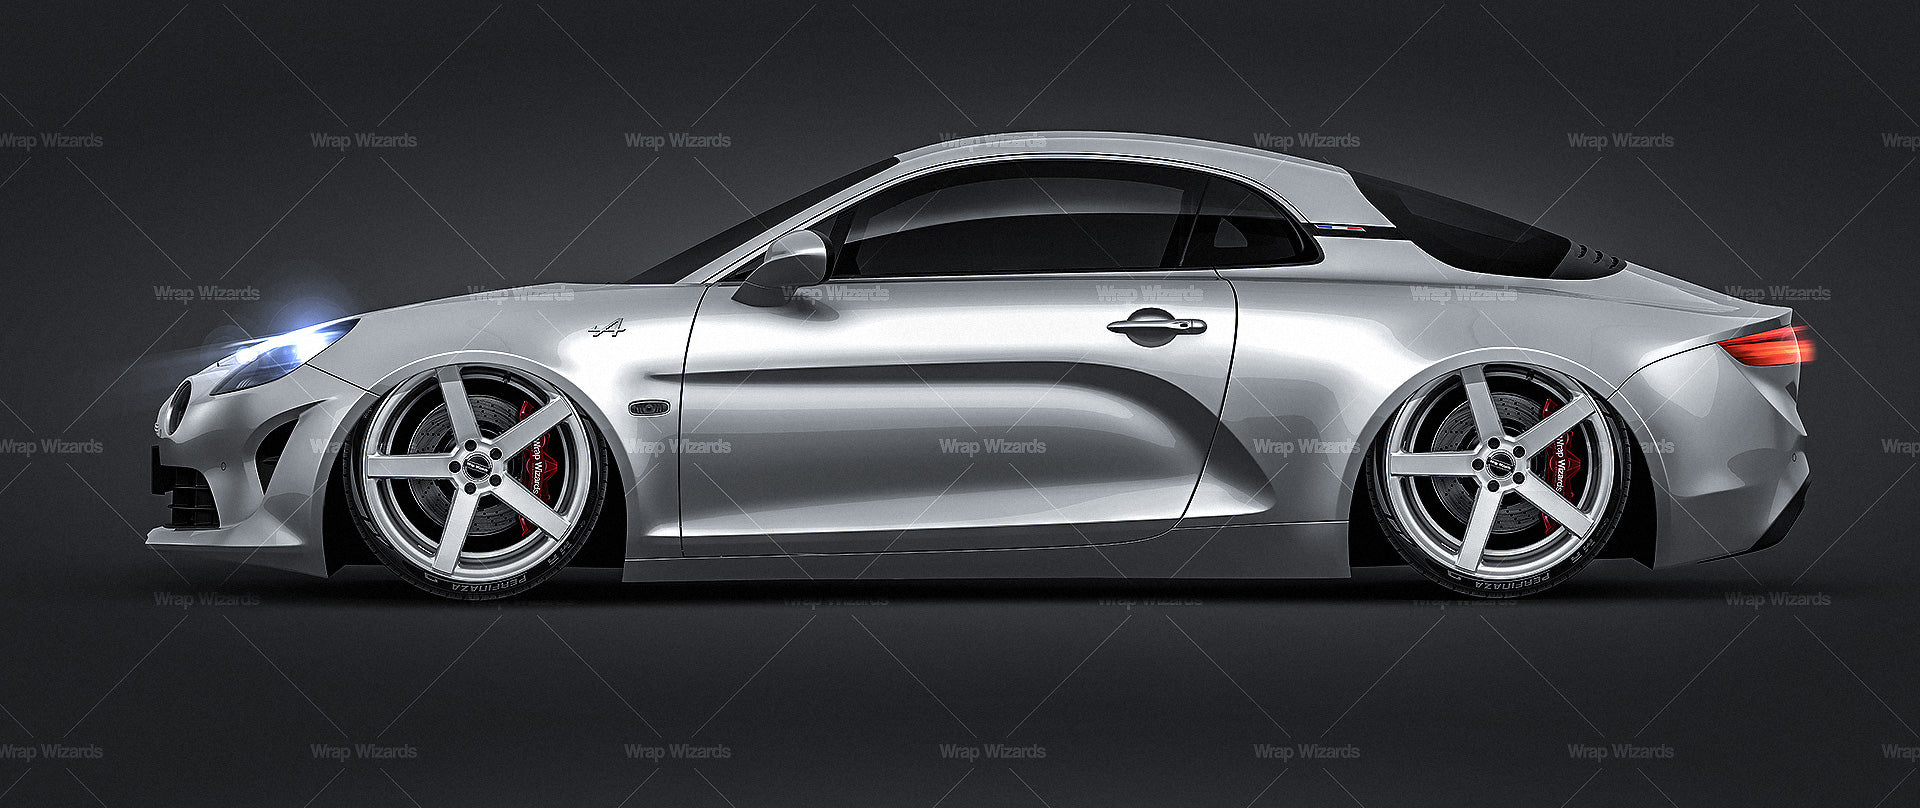 Renault Alpine A110 2018 glossy finish - all sides Car Mockup Template.psd